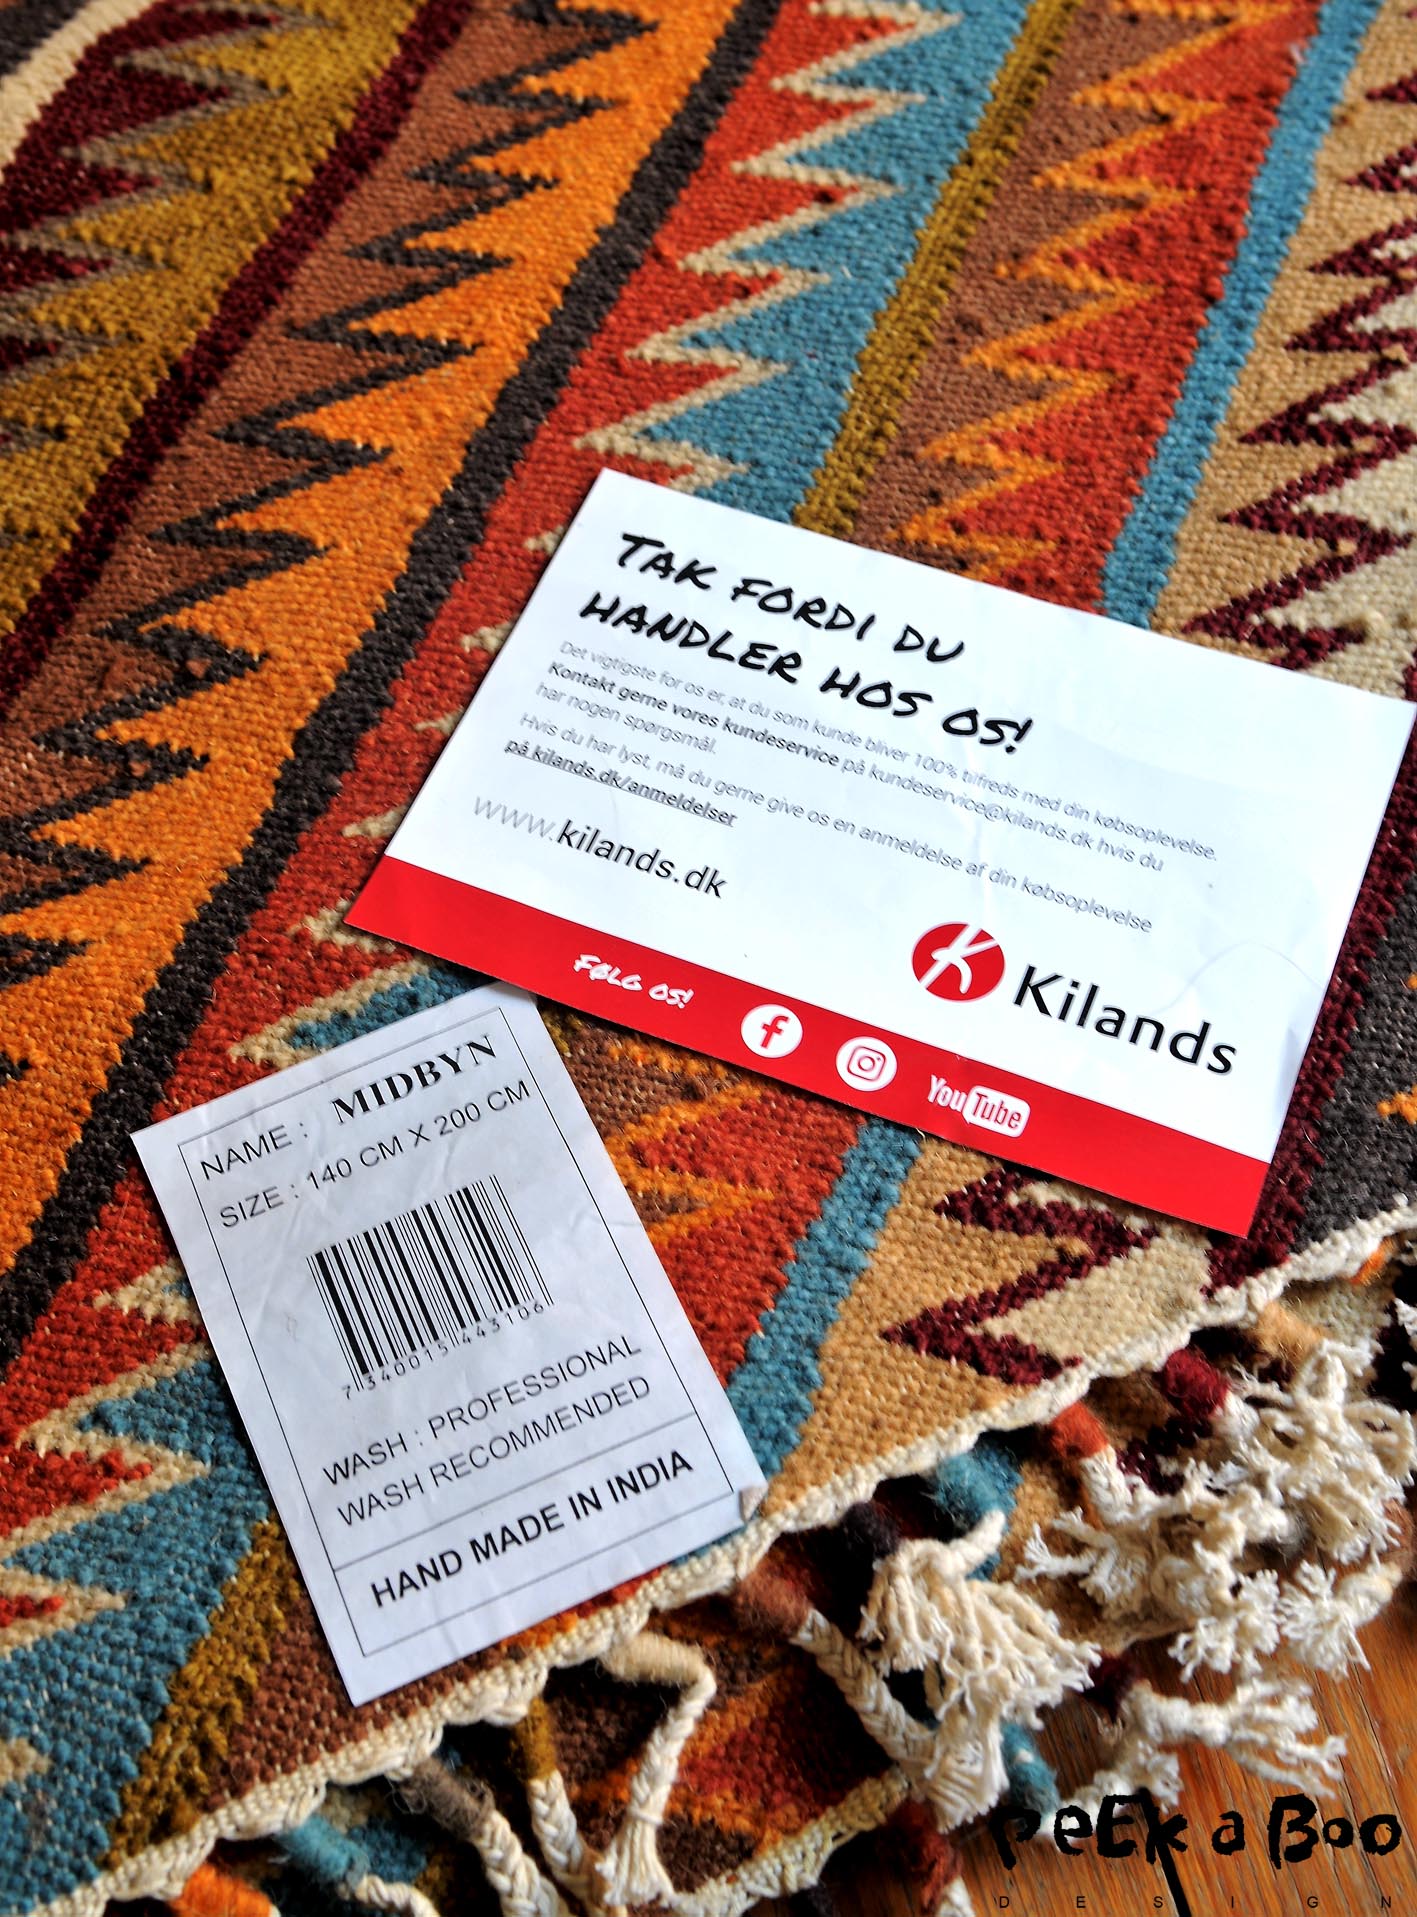 A small thank you note from the carpet shop Kilands.dk makes it even more pleasent to open the parcel. 